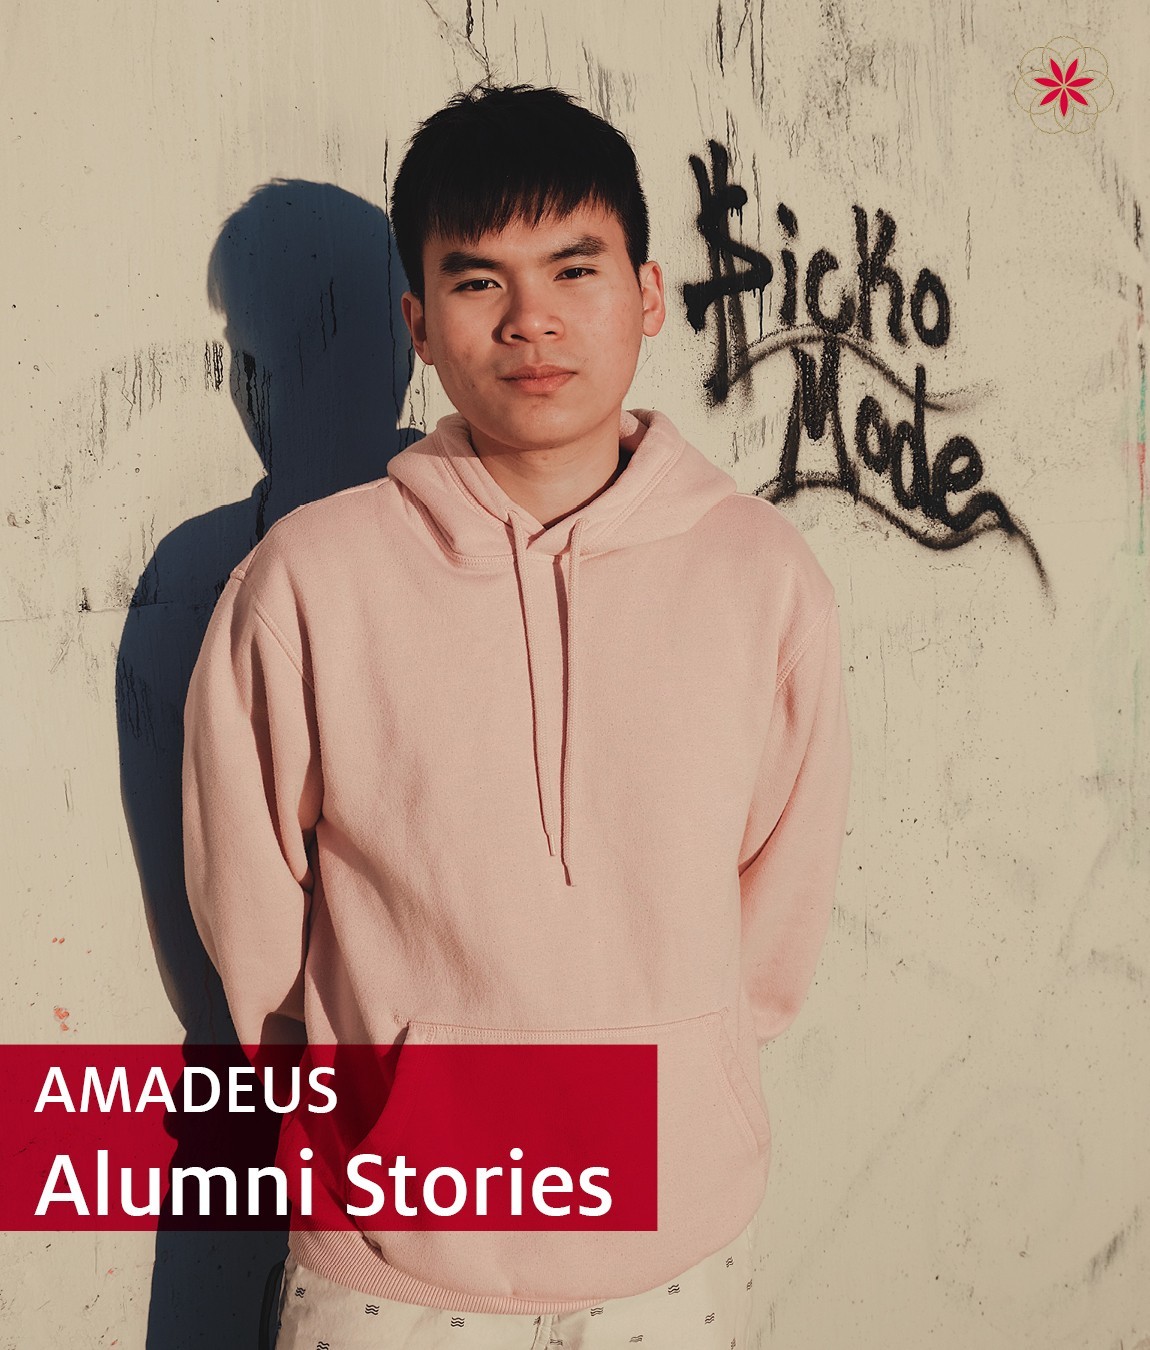 AMADEUS Alumni Update from Minh Le, who graduated 2018 and studies in Grand Rapids, Michigan